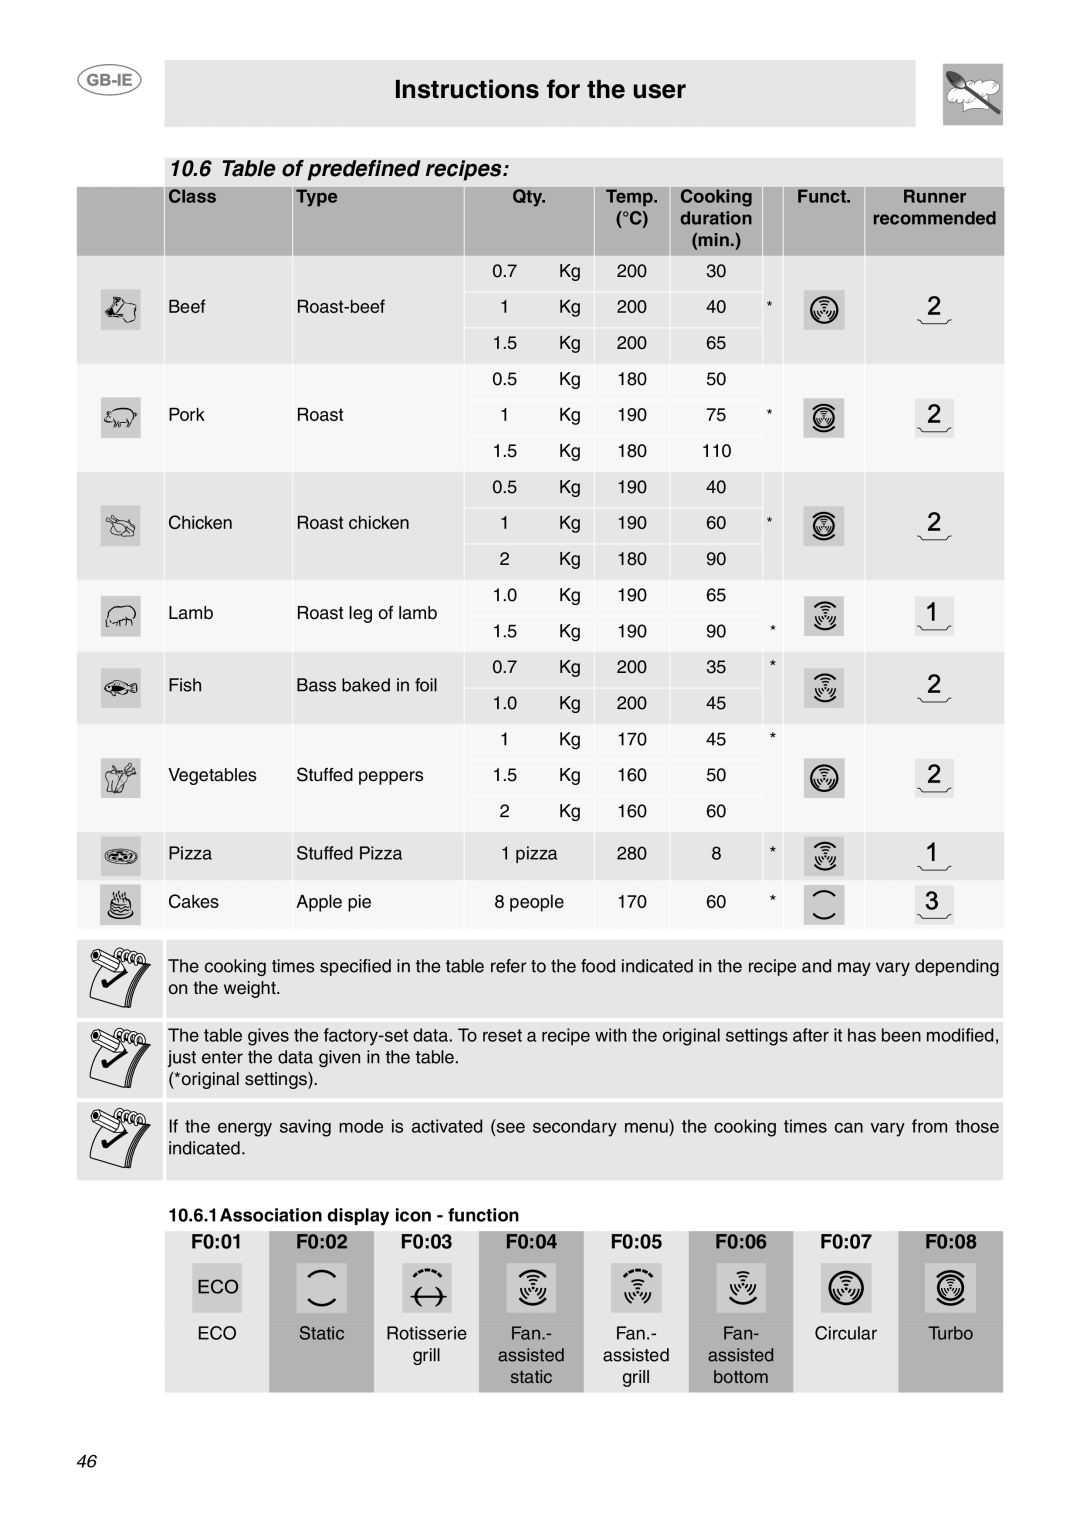 Smeg CE92IPX Table of predefined recipes, Instructions for the user, F001, F002, F003, F004, F005, F006, F007, F008, Class 